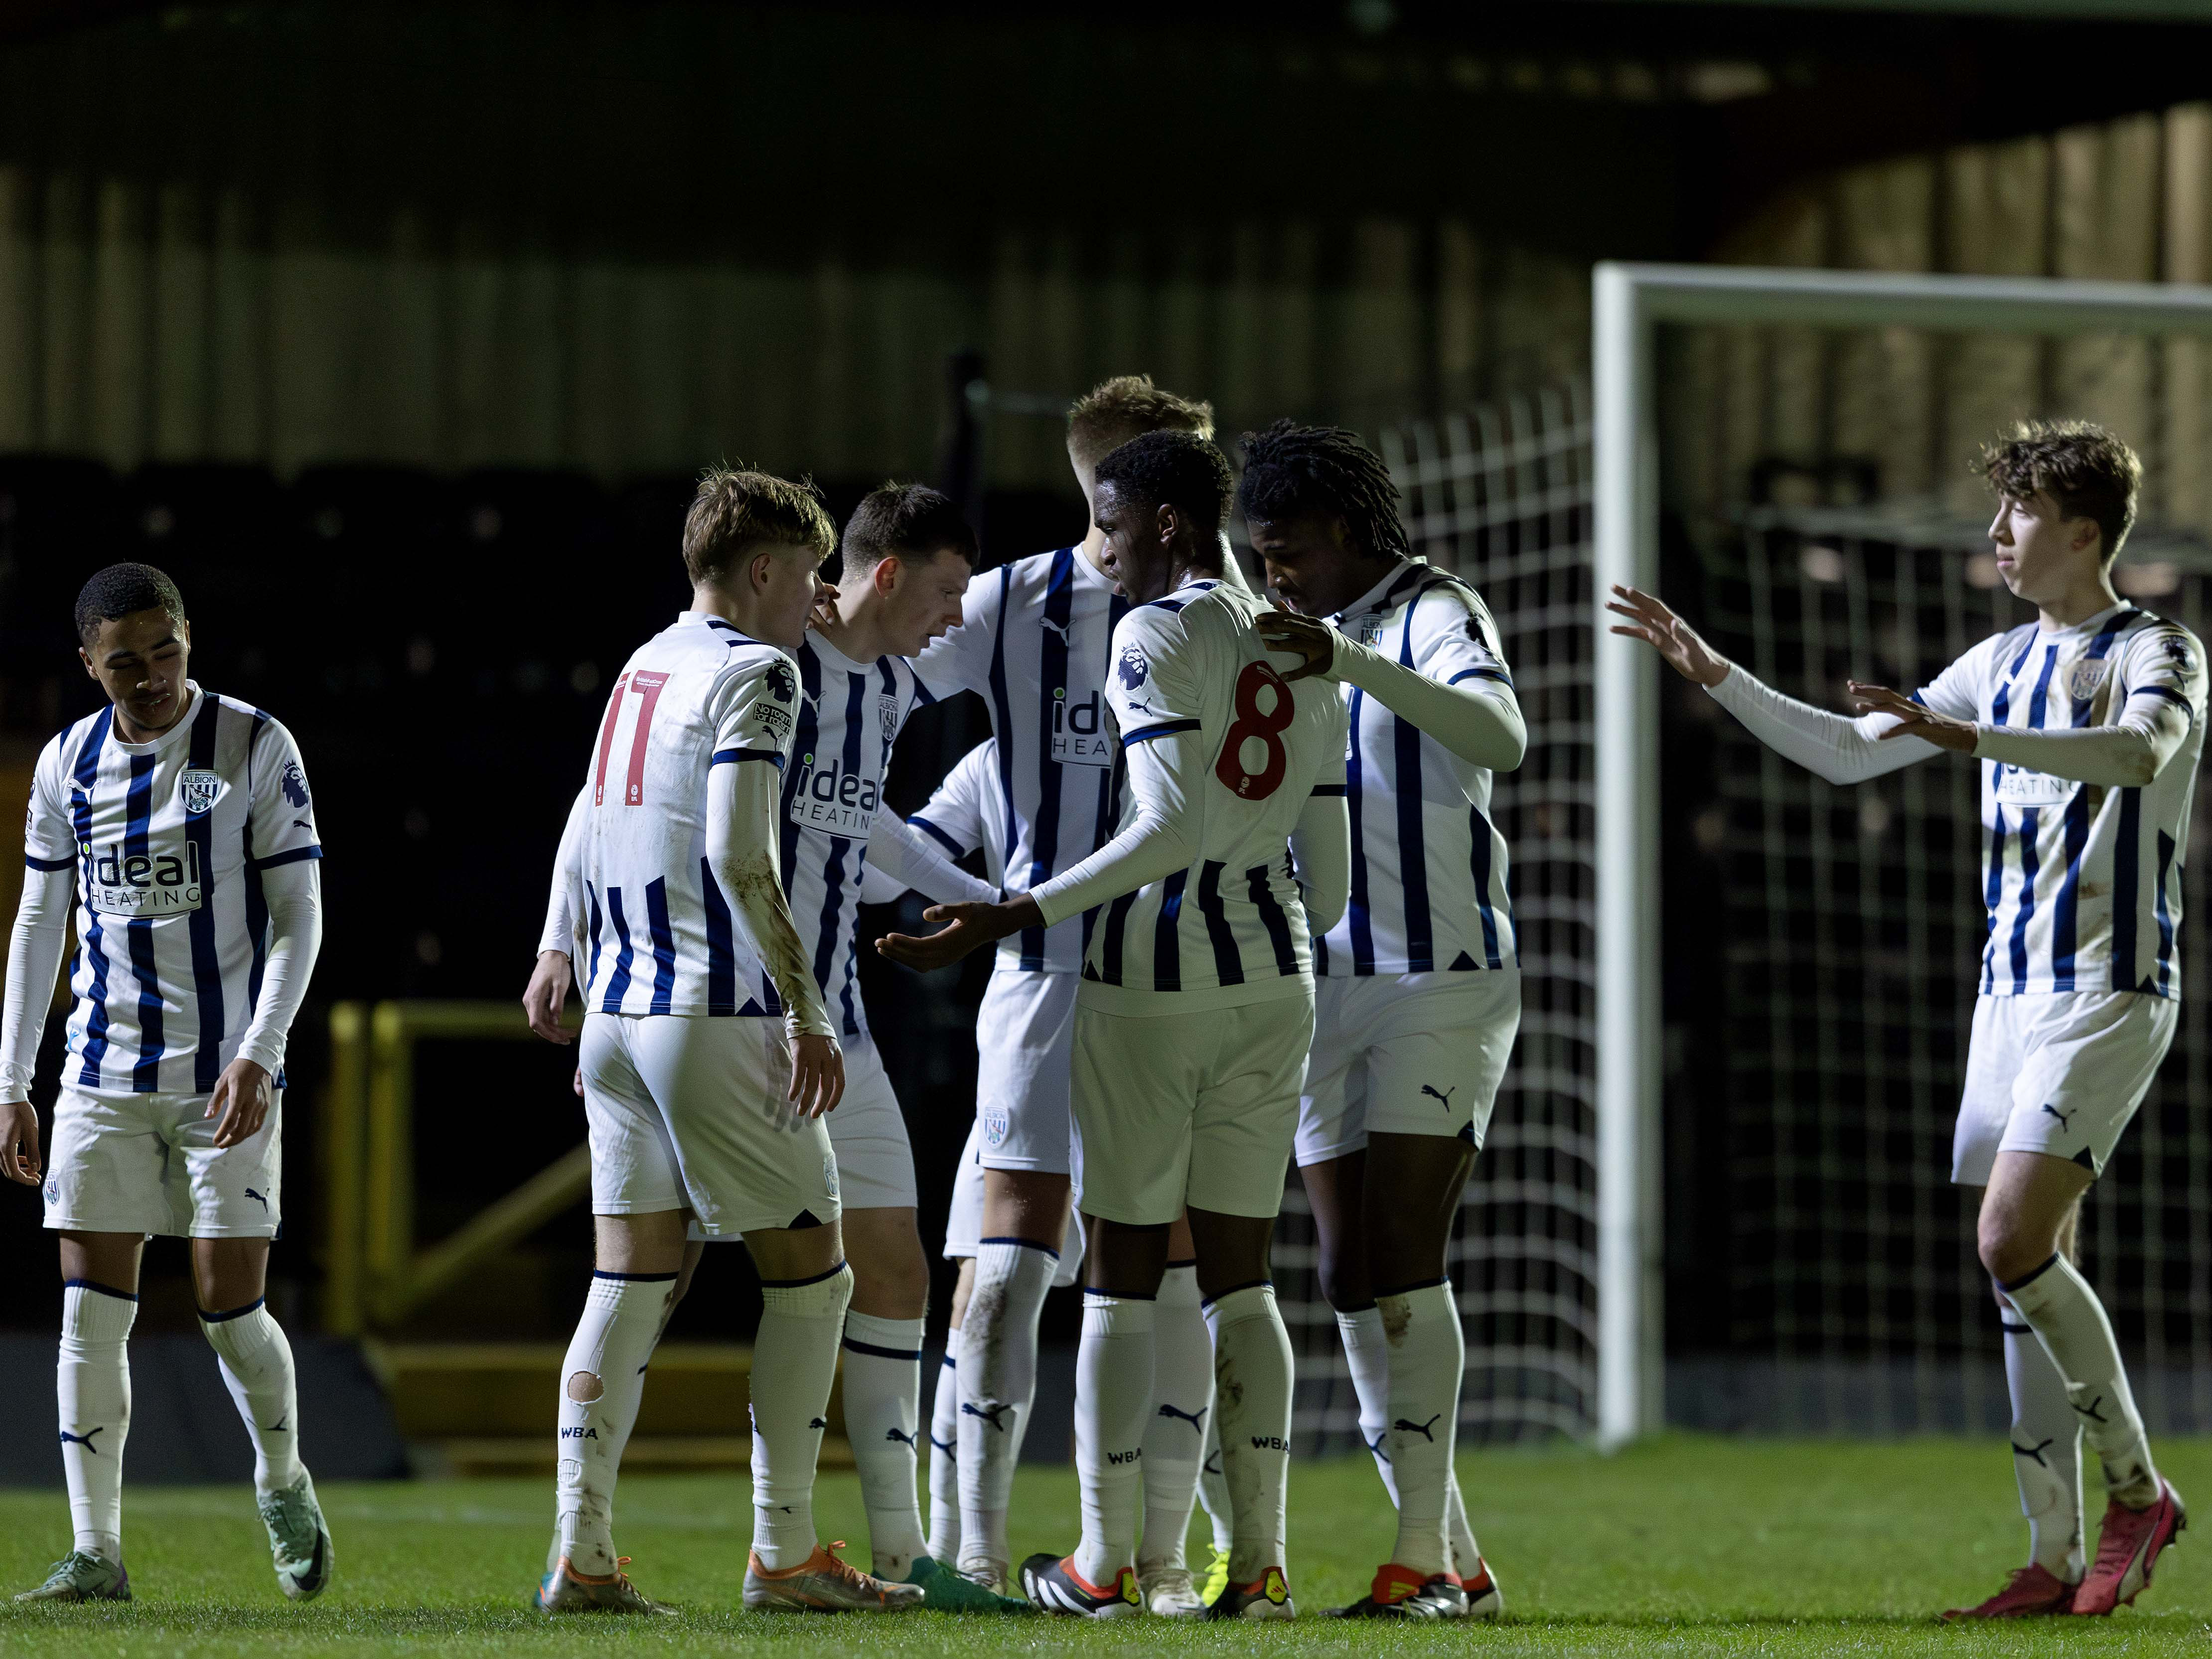 An image of Albion's PL2 players celebrating a goal against Arsenal